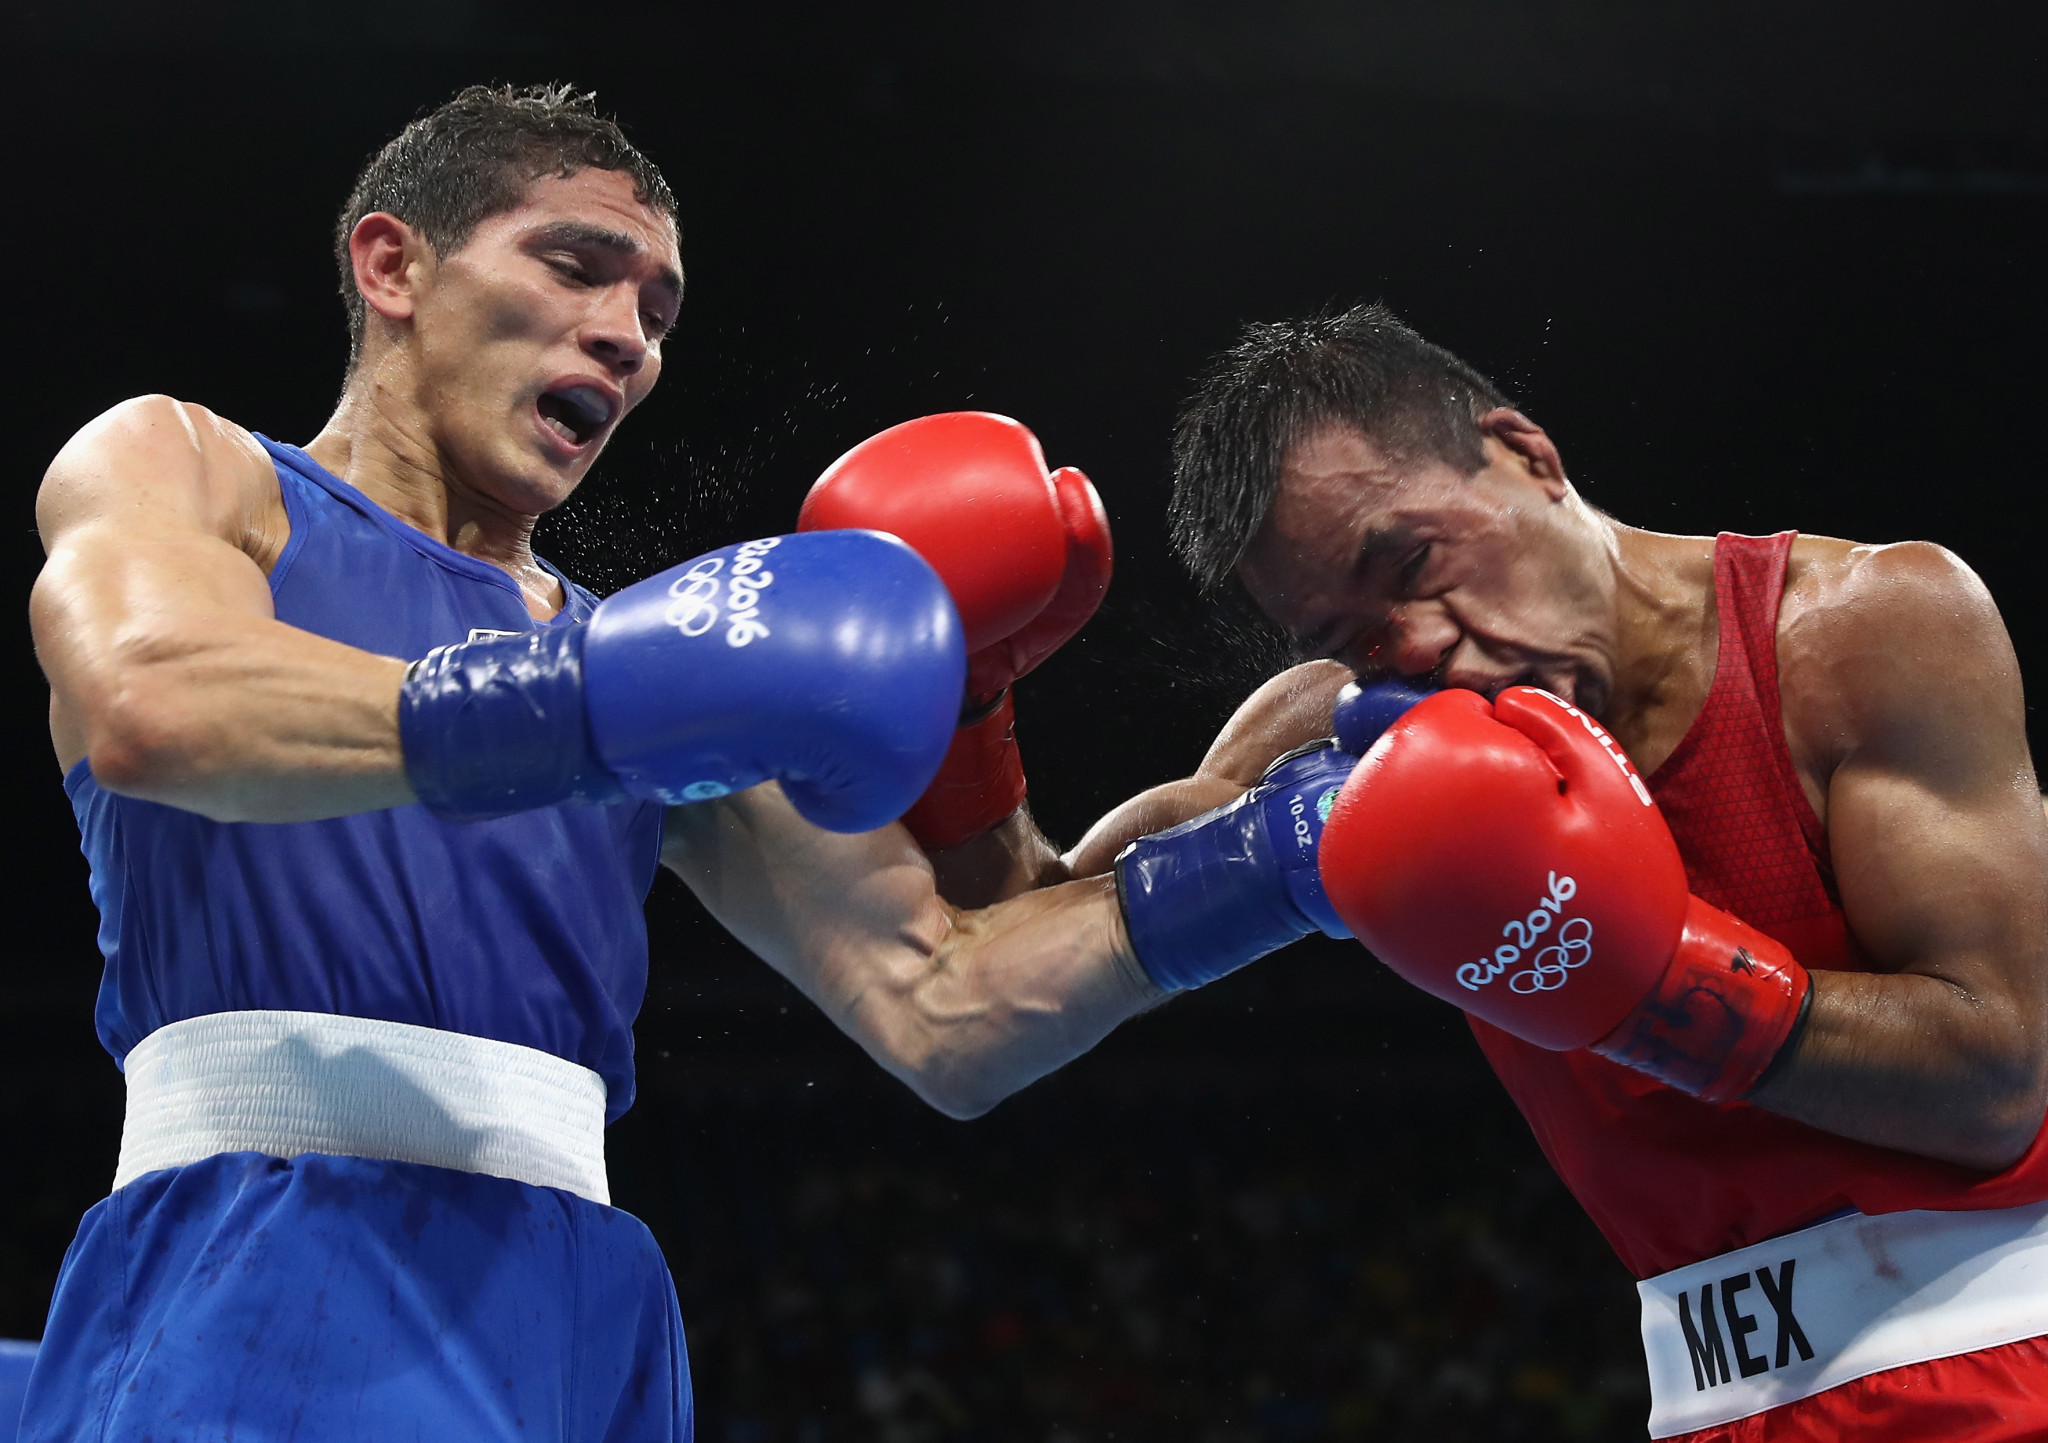 AIBA is hoping to retain its status as the Olympic governing body for boxing ©Getty Images